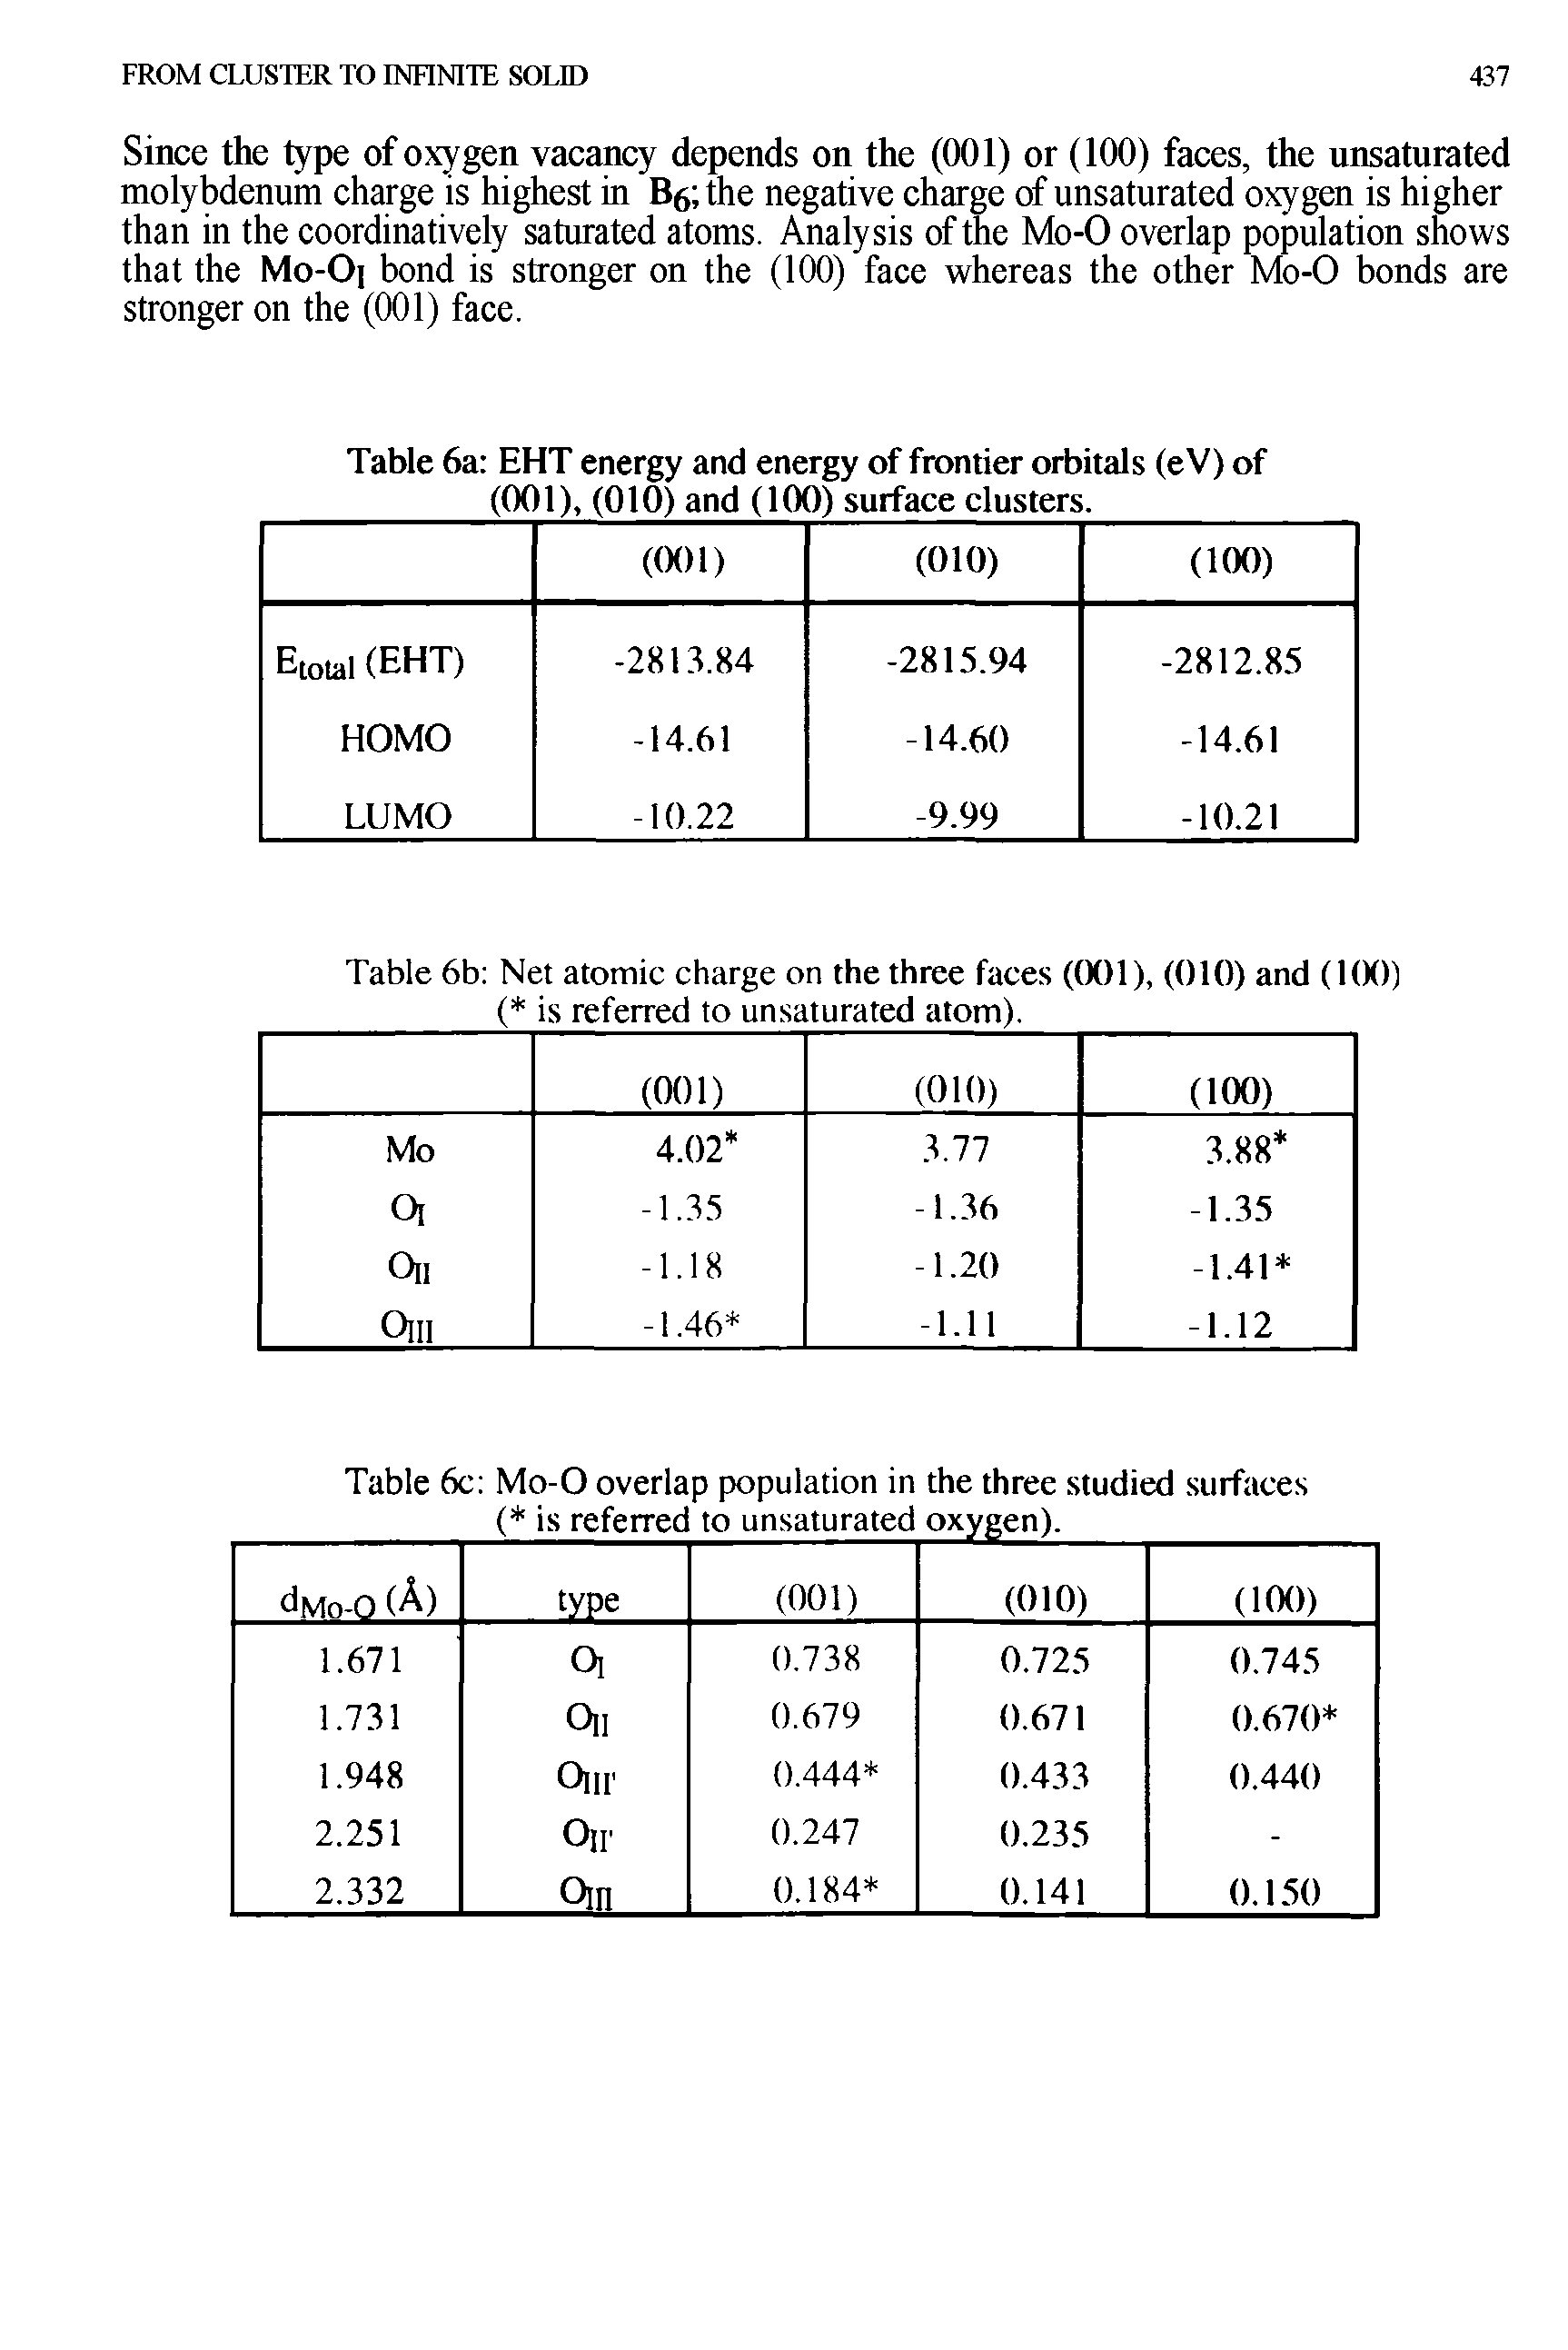 Table 6a EHT energy and energy of frontier orbitals (eV) of (001), (010) and (100) surface clusters.